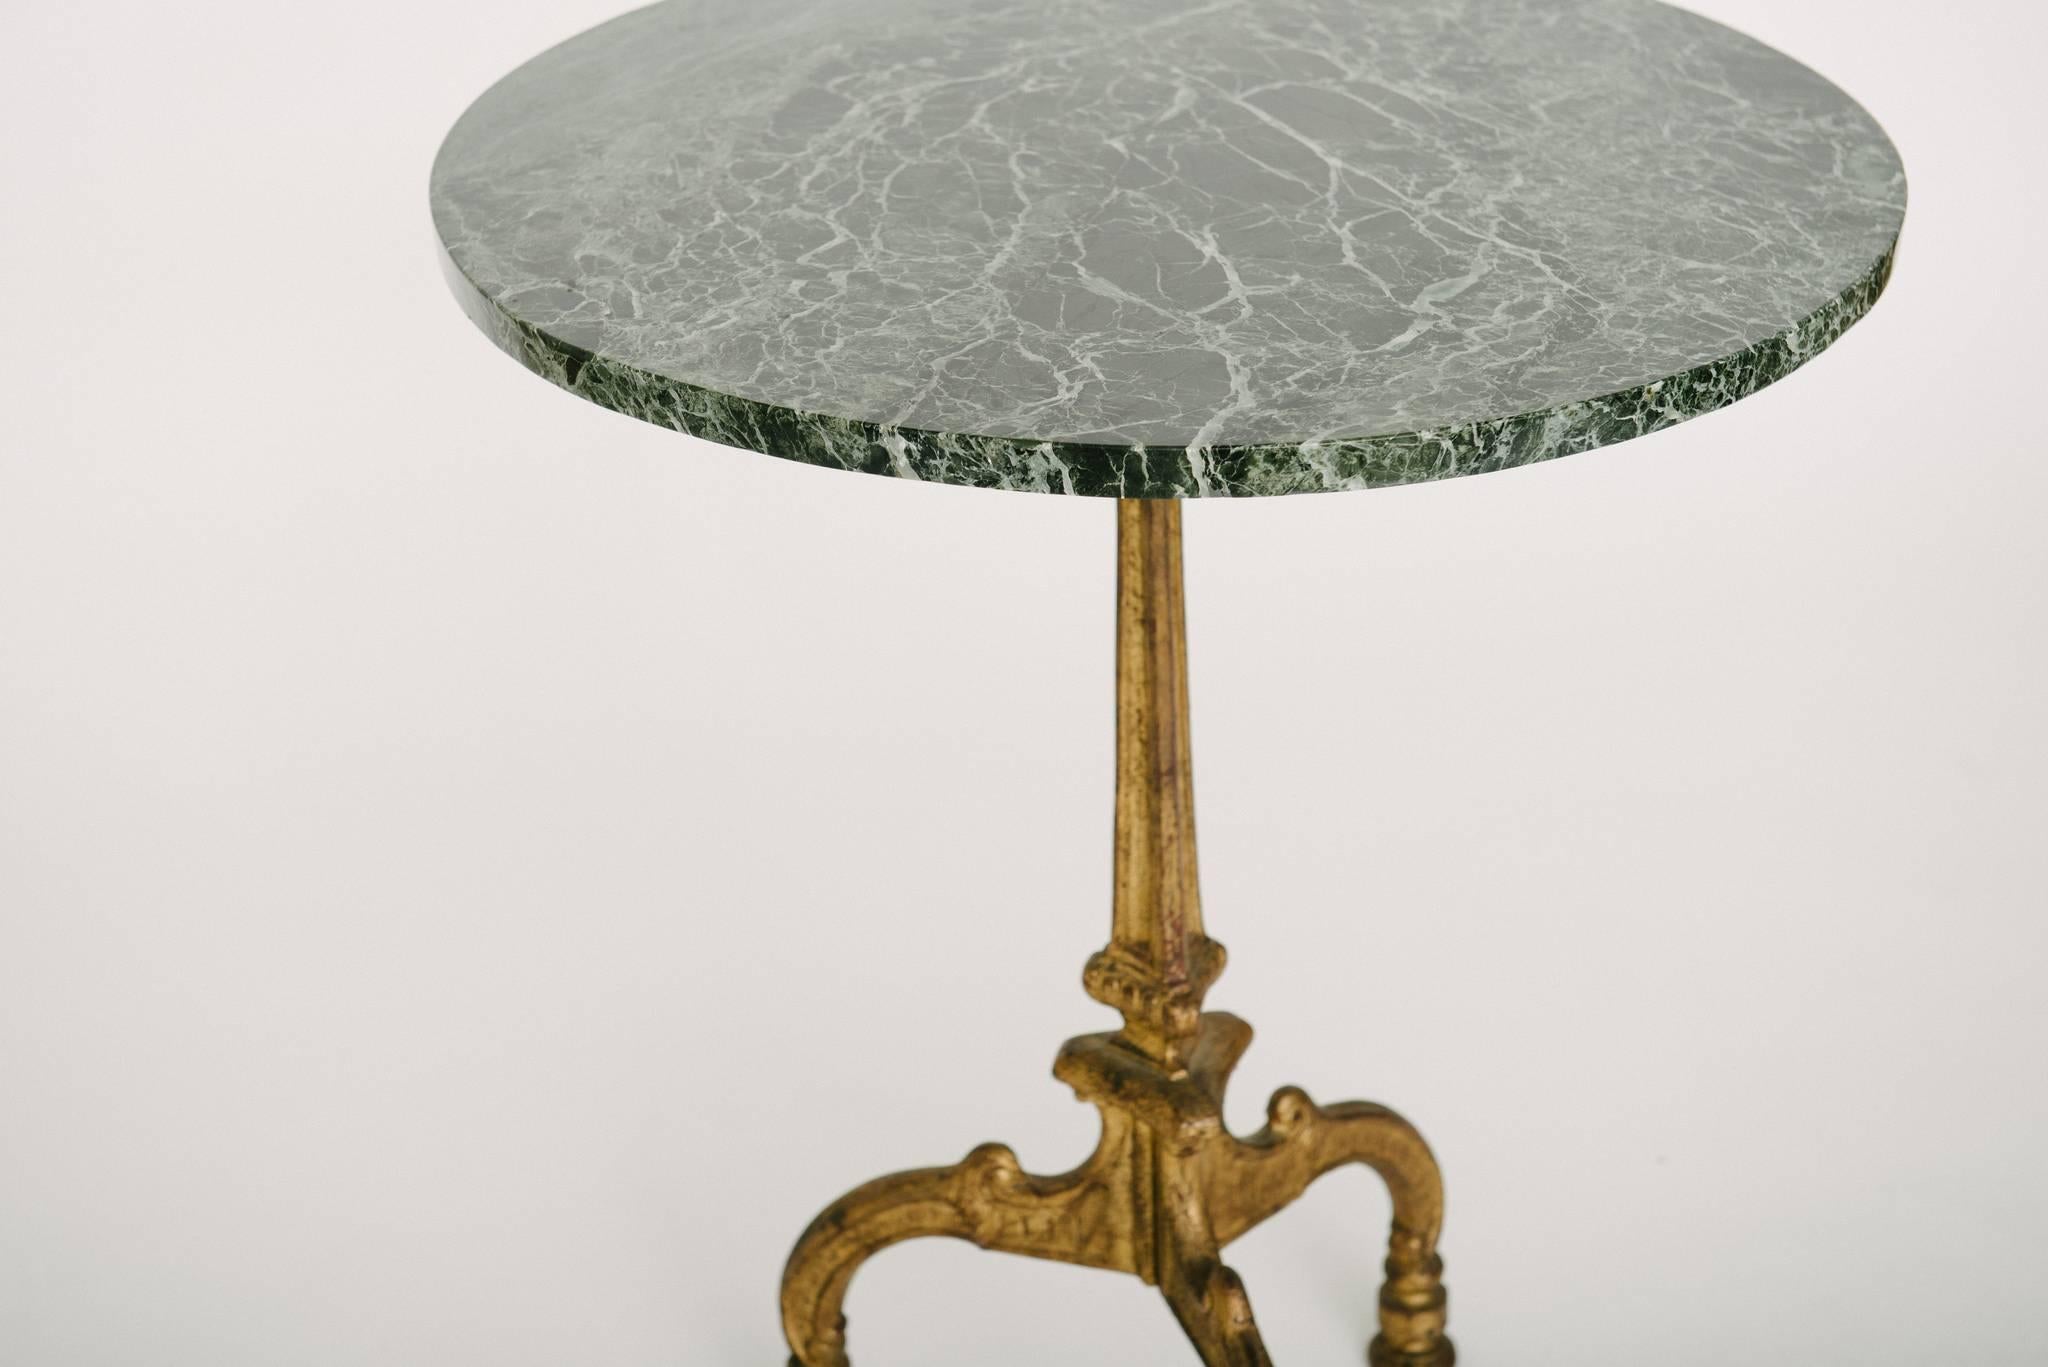 Antique French gilt iron Neoclassical style gueridon with green marble top.